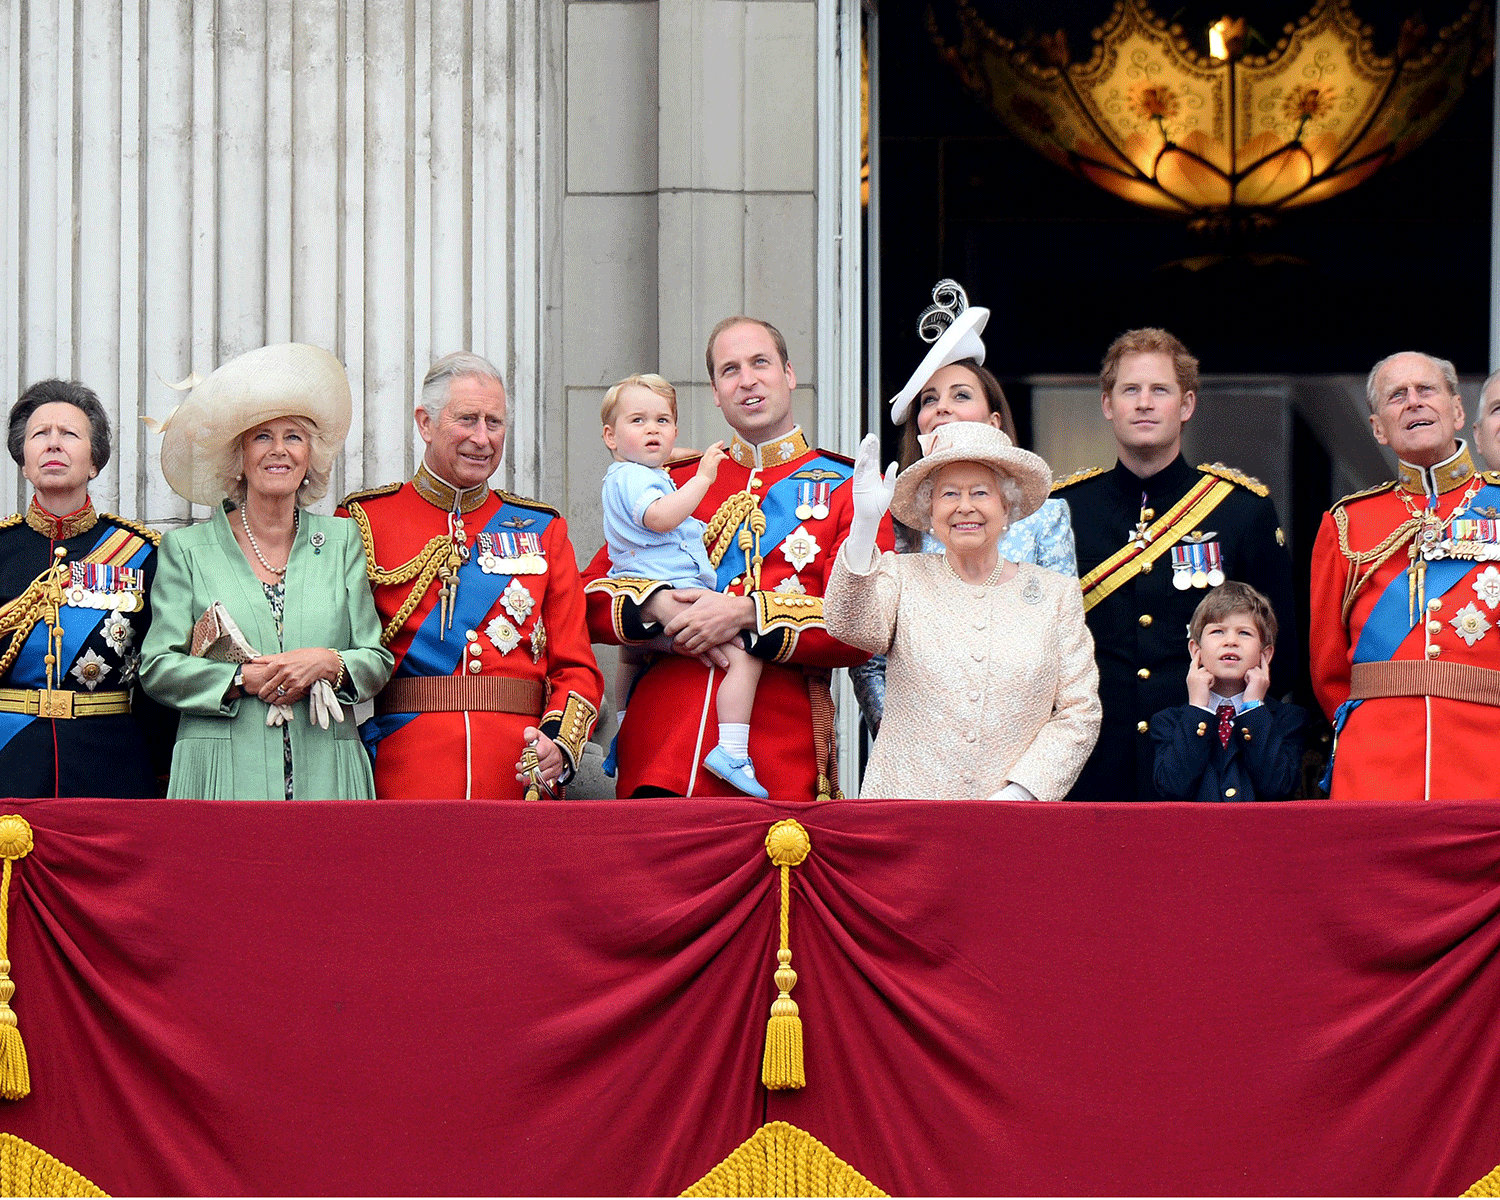 Get Does The Royal Family Still Live In Buckingham Palace Pics